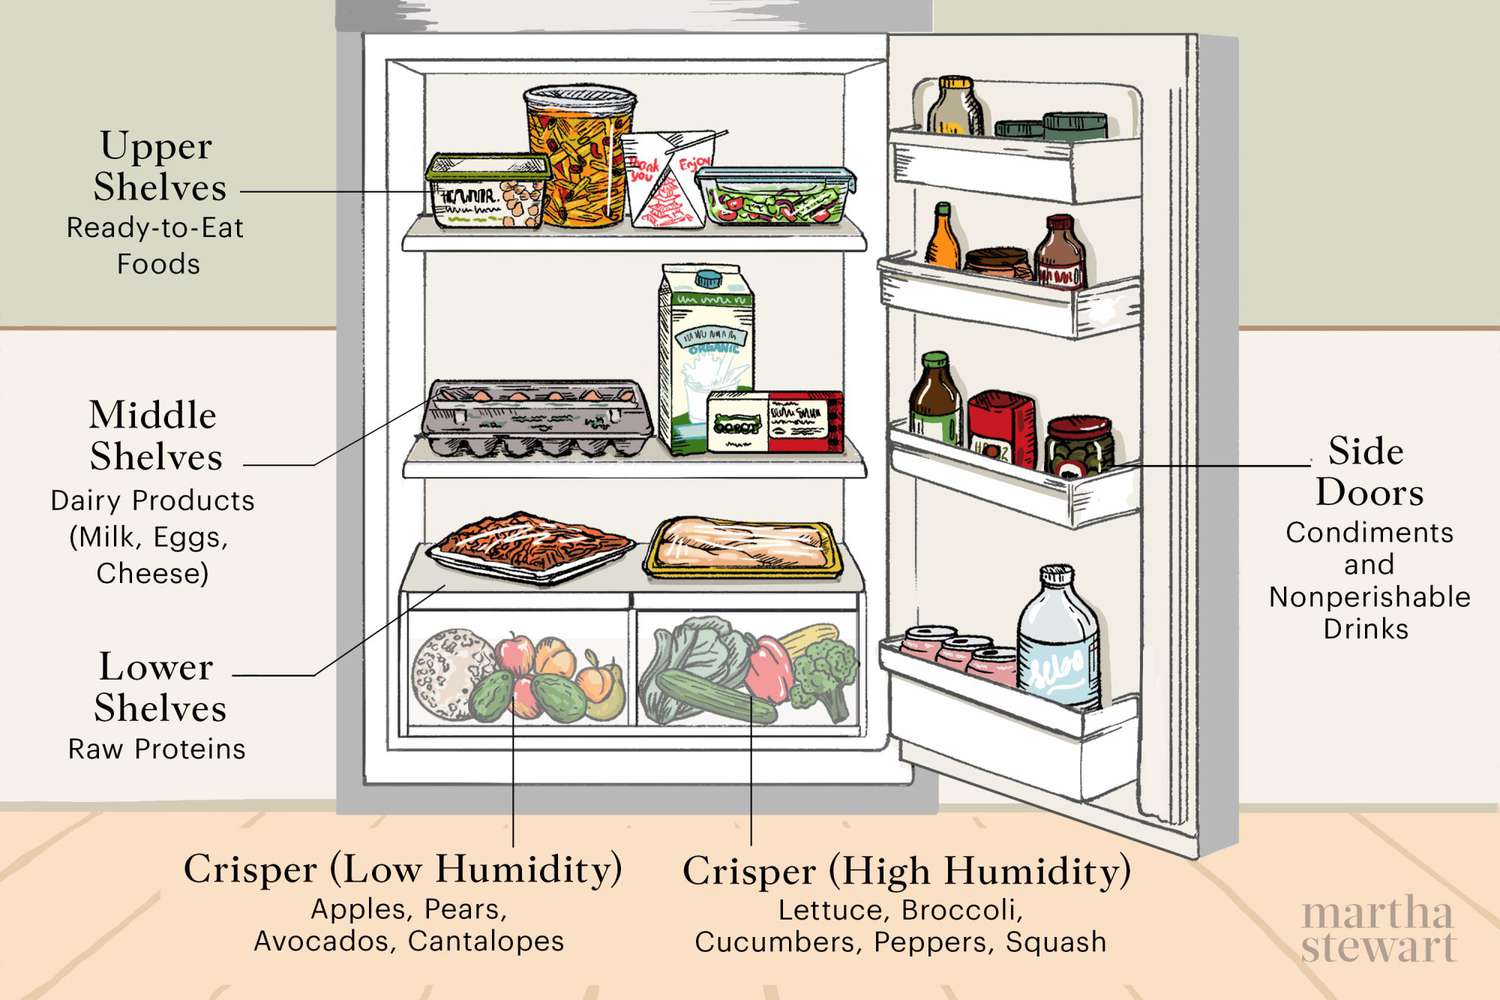 How to Store Foods in the Refrigerator So They Stay Fresher for Longer